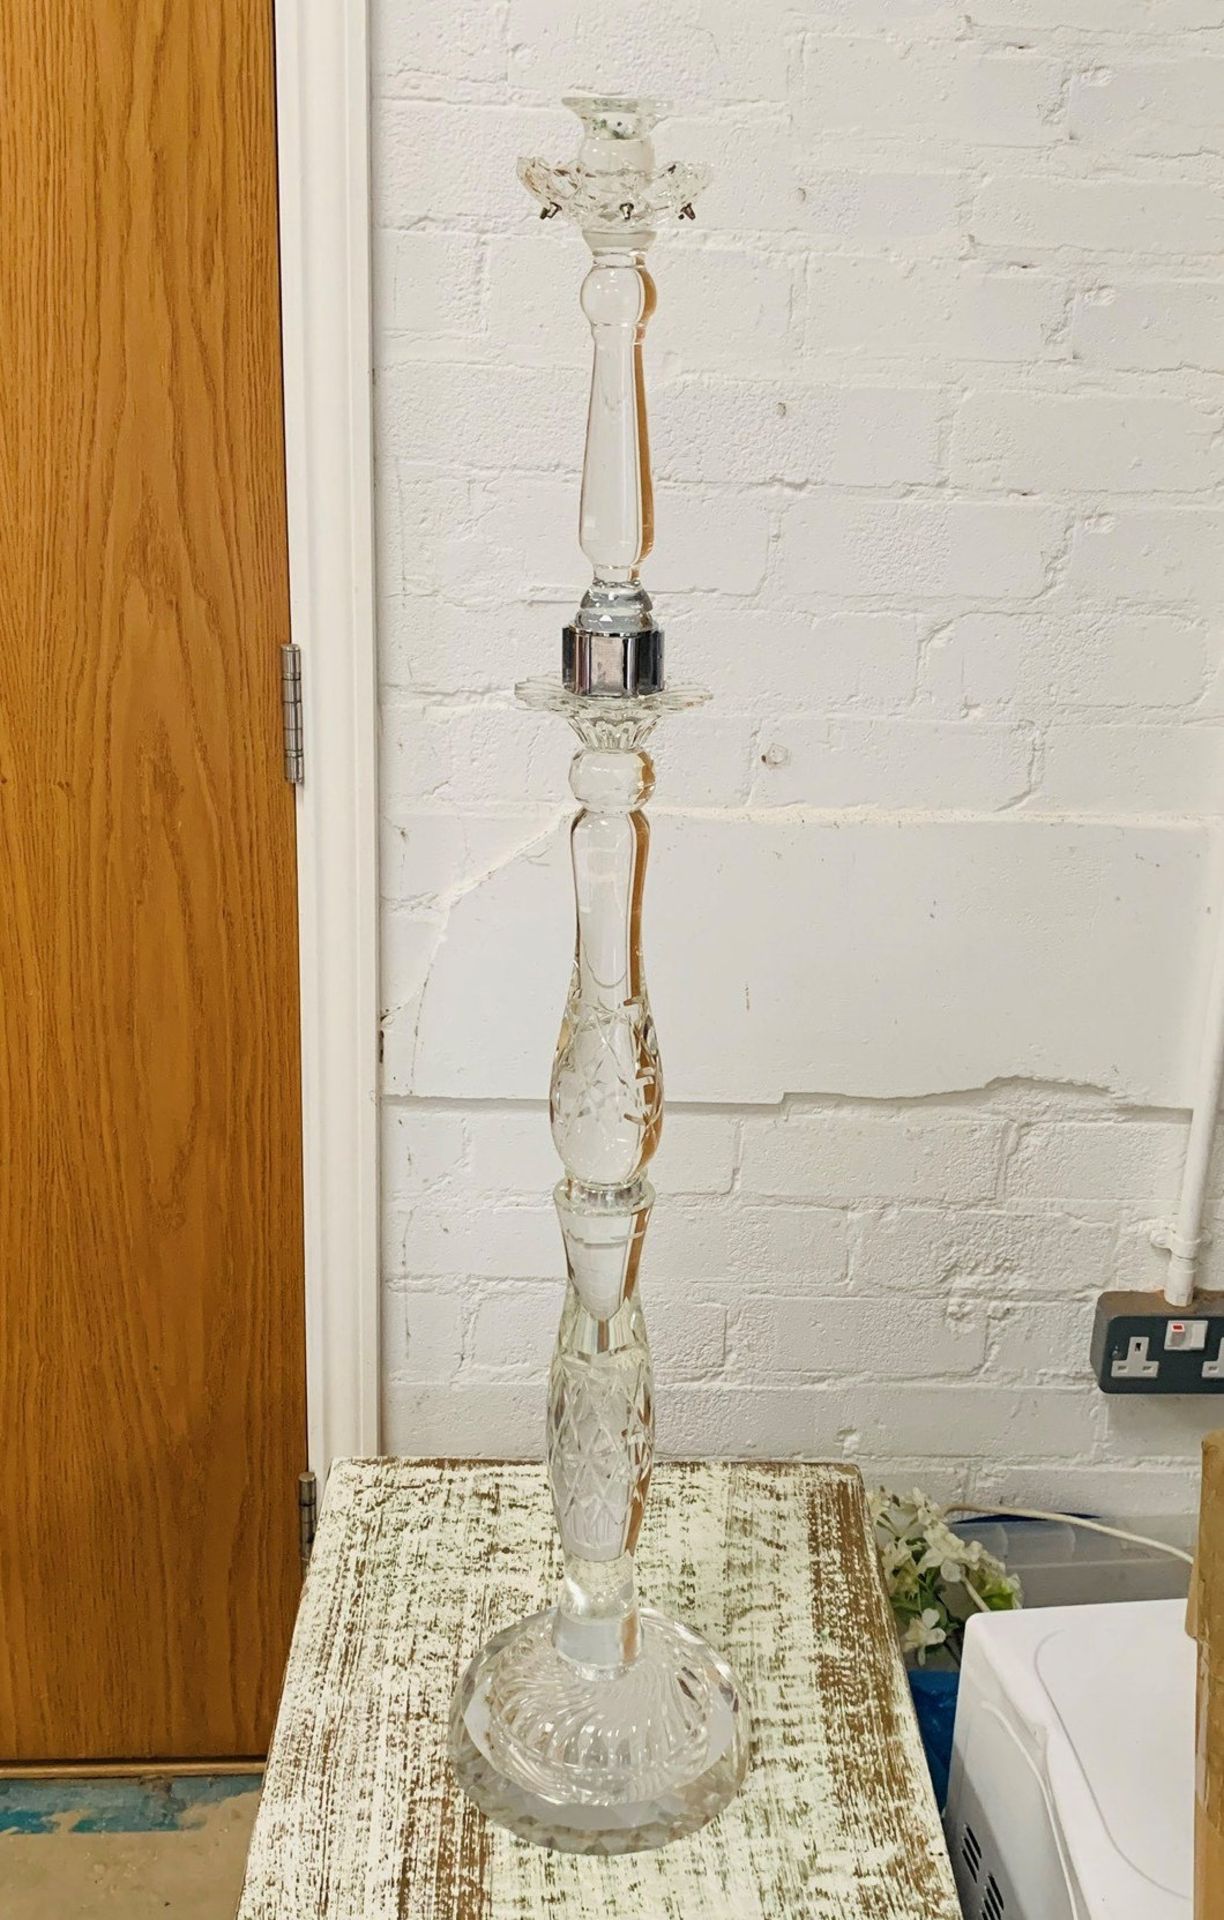 3 x 1m Tall Crystal Candlestands - Dimensions: 100x19cm - Ref: Lot 23 - CL548 - Location: